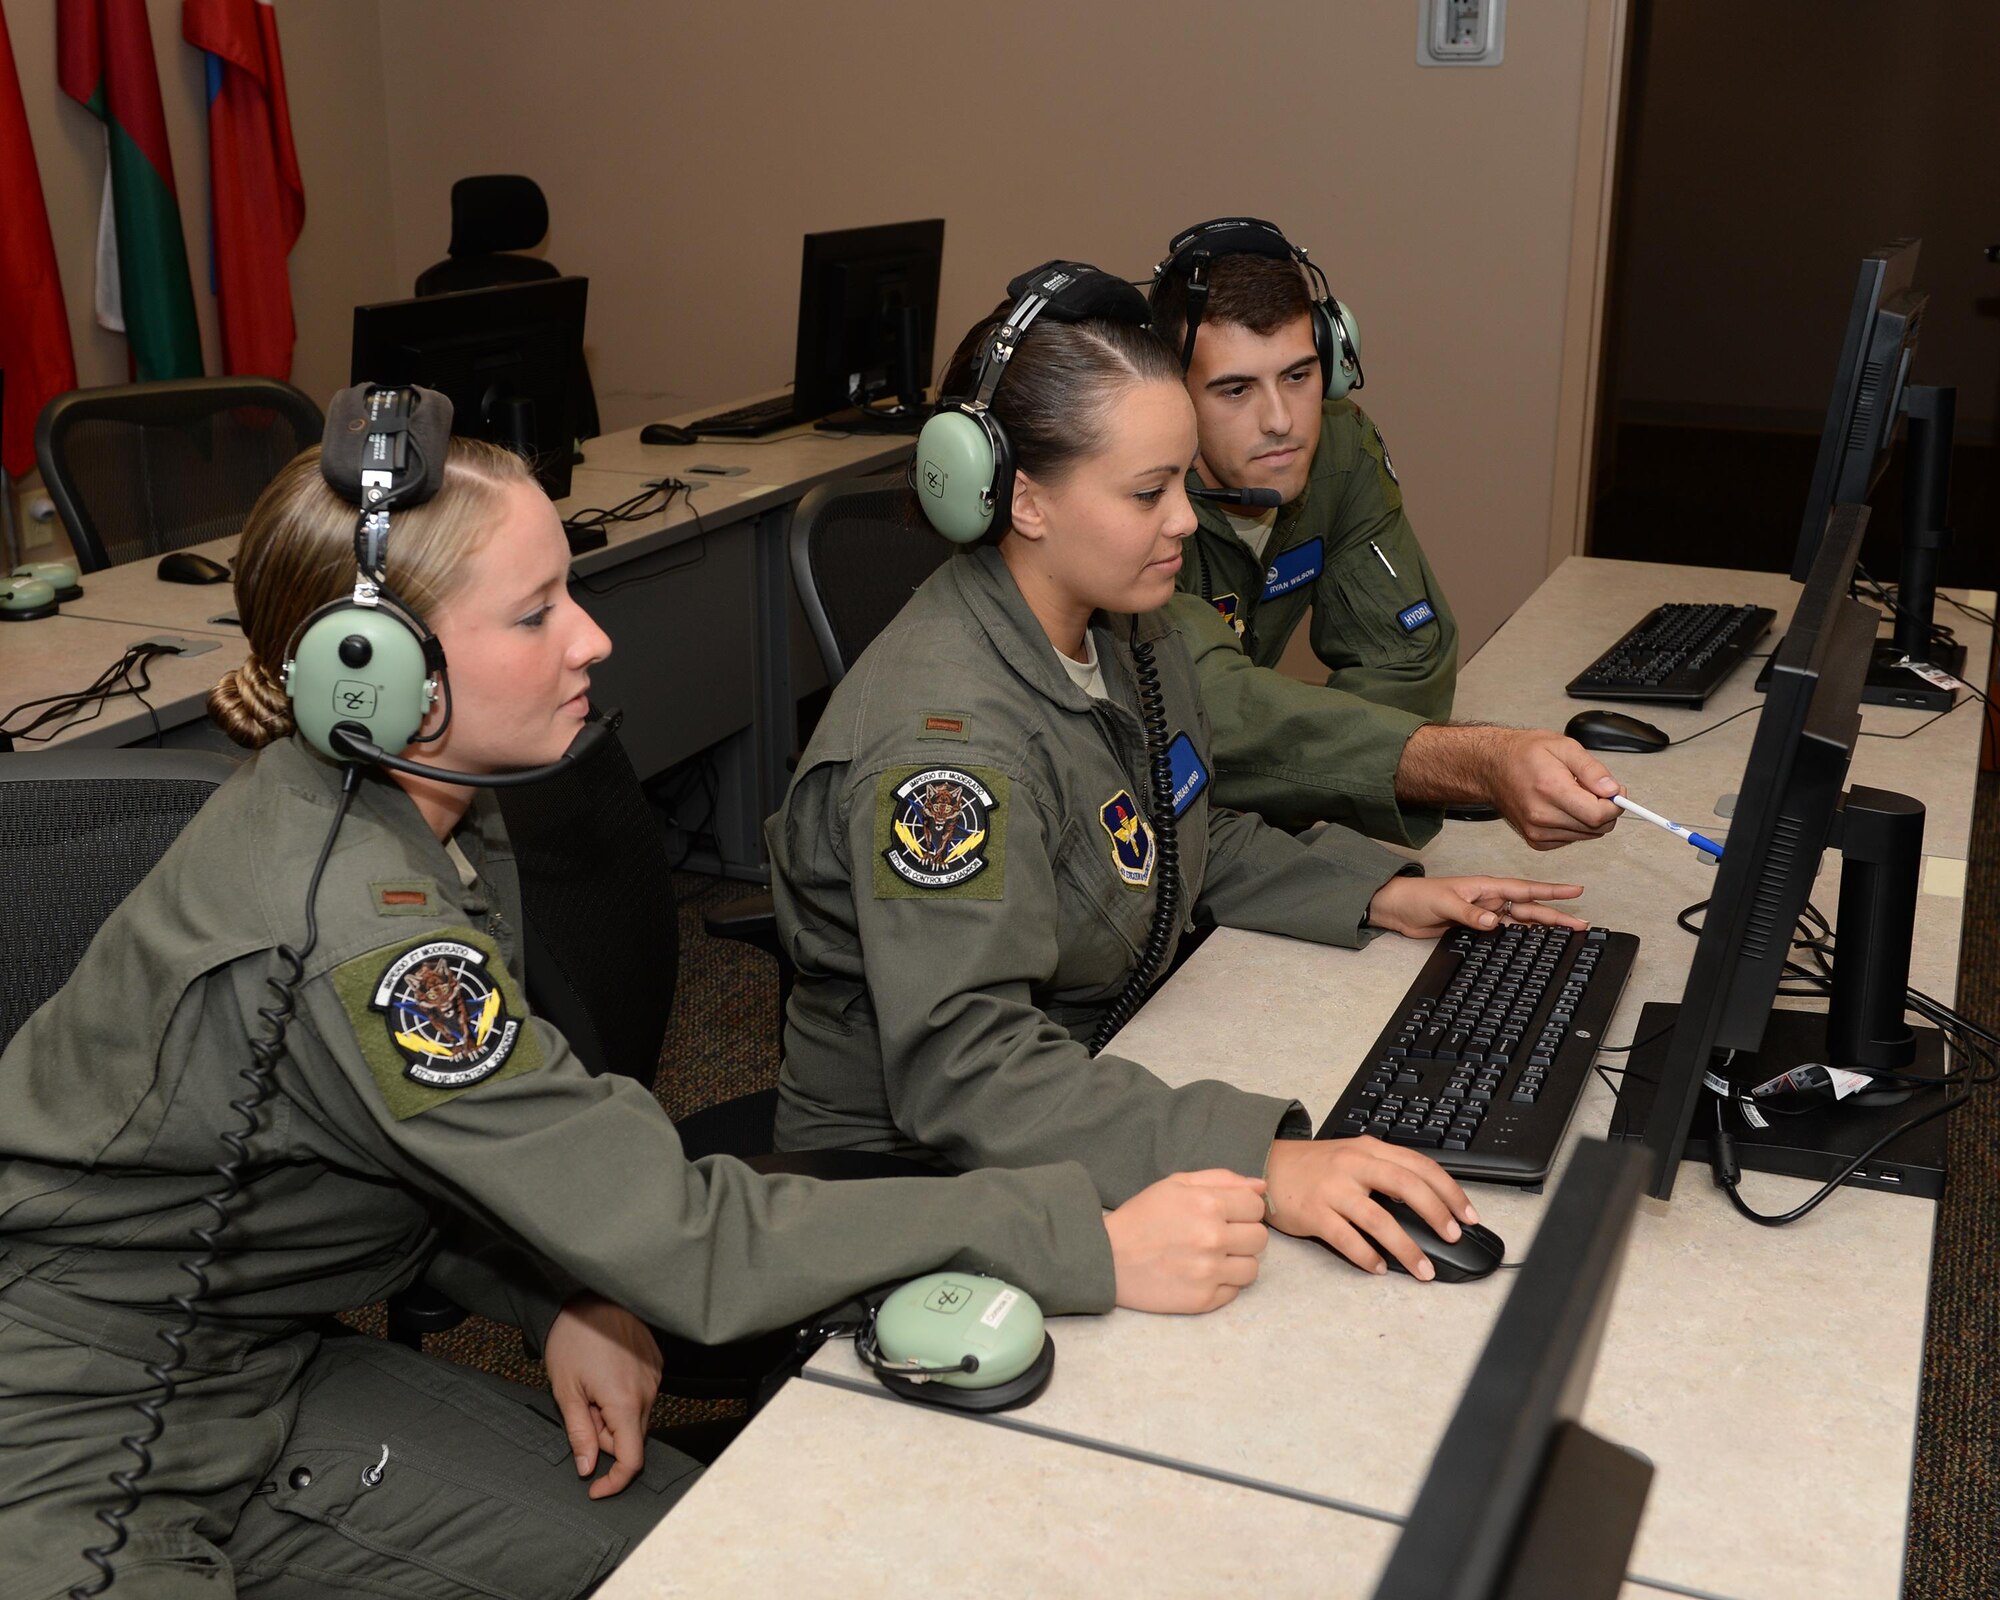 Students from the 337th Air Control Squadron monitor simulated battle space during an Undergraduate Air Battle Manager Course training exercise at Tyndall Air Force Base, Fla. July 13, 2016. Individuals who graduate this course are trained and qualified for airborne command and control, air surveillance, electronic warfare, and airborne weapons capabilities in aircraft. (U.S. Air Force photo by Airman 1st Class Cody R. Miller/Released) 